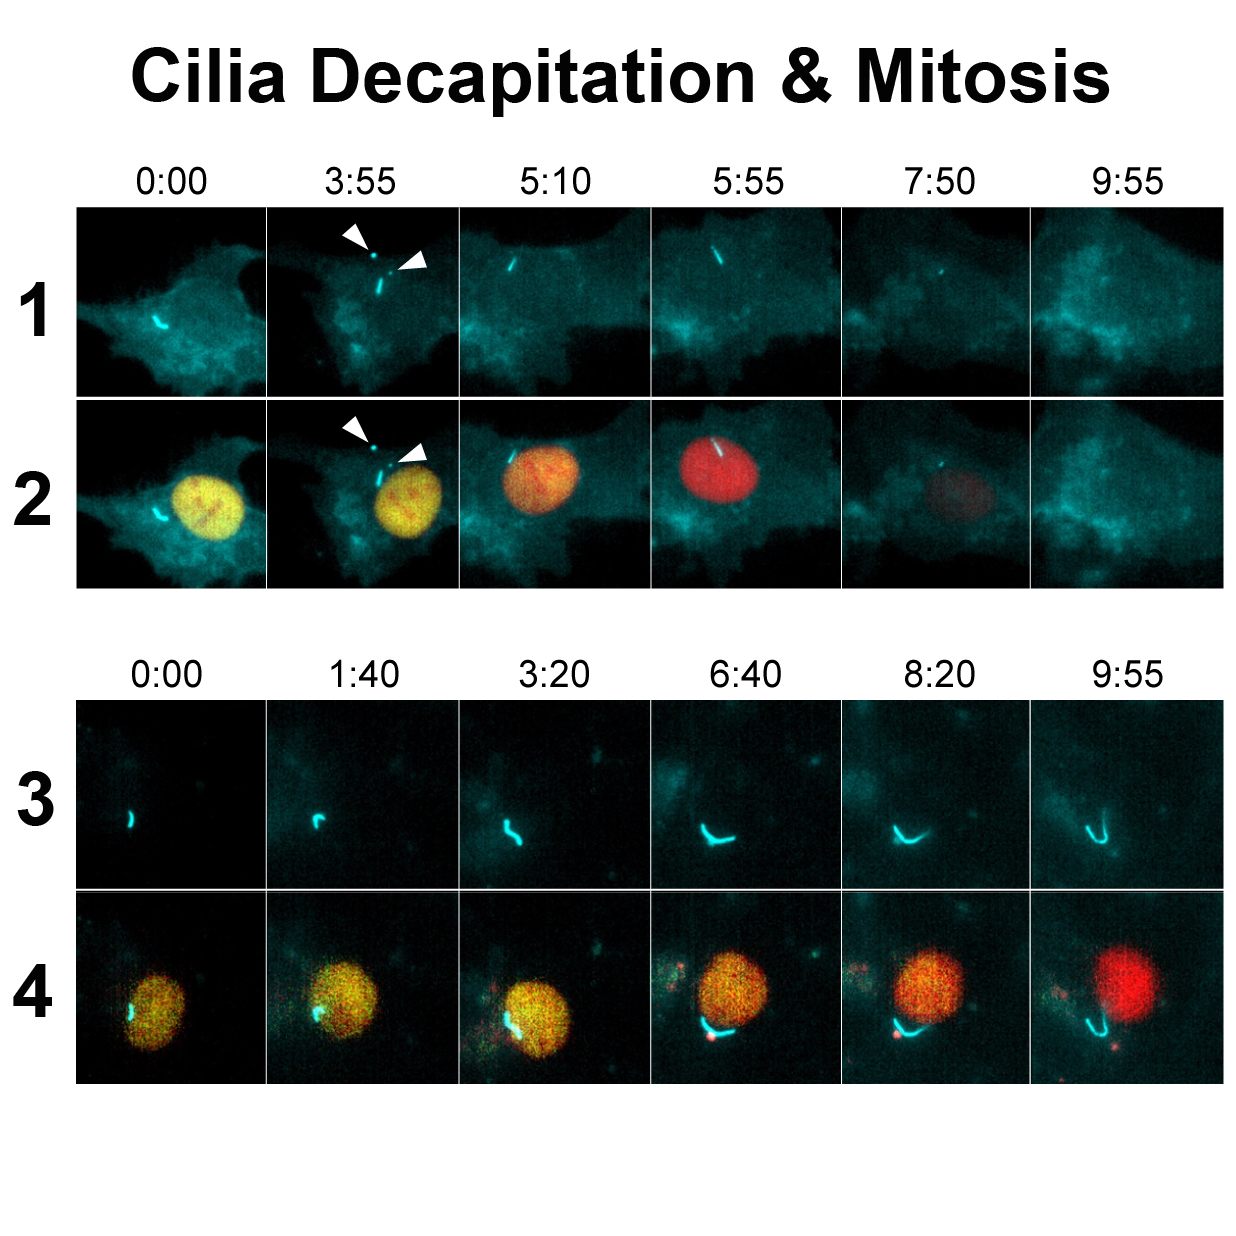 In normal cells (top panels), cilia decapitation (minute 3:55) usually occurs while cells are in the quiescent state (yellow nuclei) before they transition into mitosis (dark nuclei, minute 7:50). When cilia are prevented from forming “actin wires” (bottom panels), they are also unable to decapitate, causing their cells to transition more slowly from quiescence to mitosis. Credit: Courtesy of Cell Press